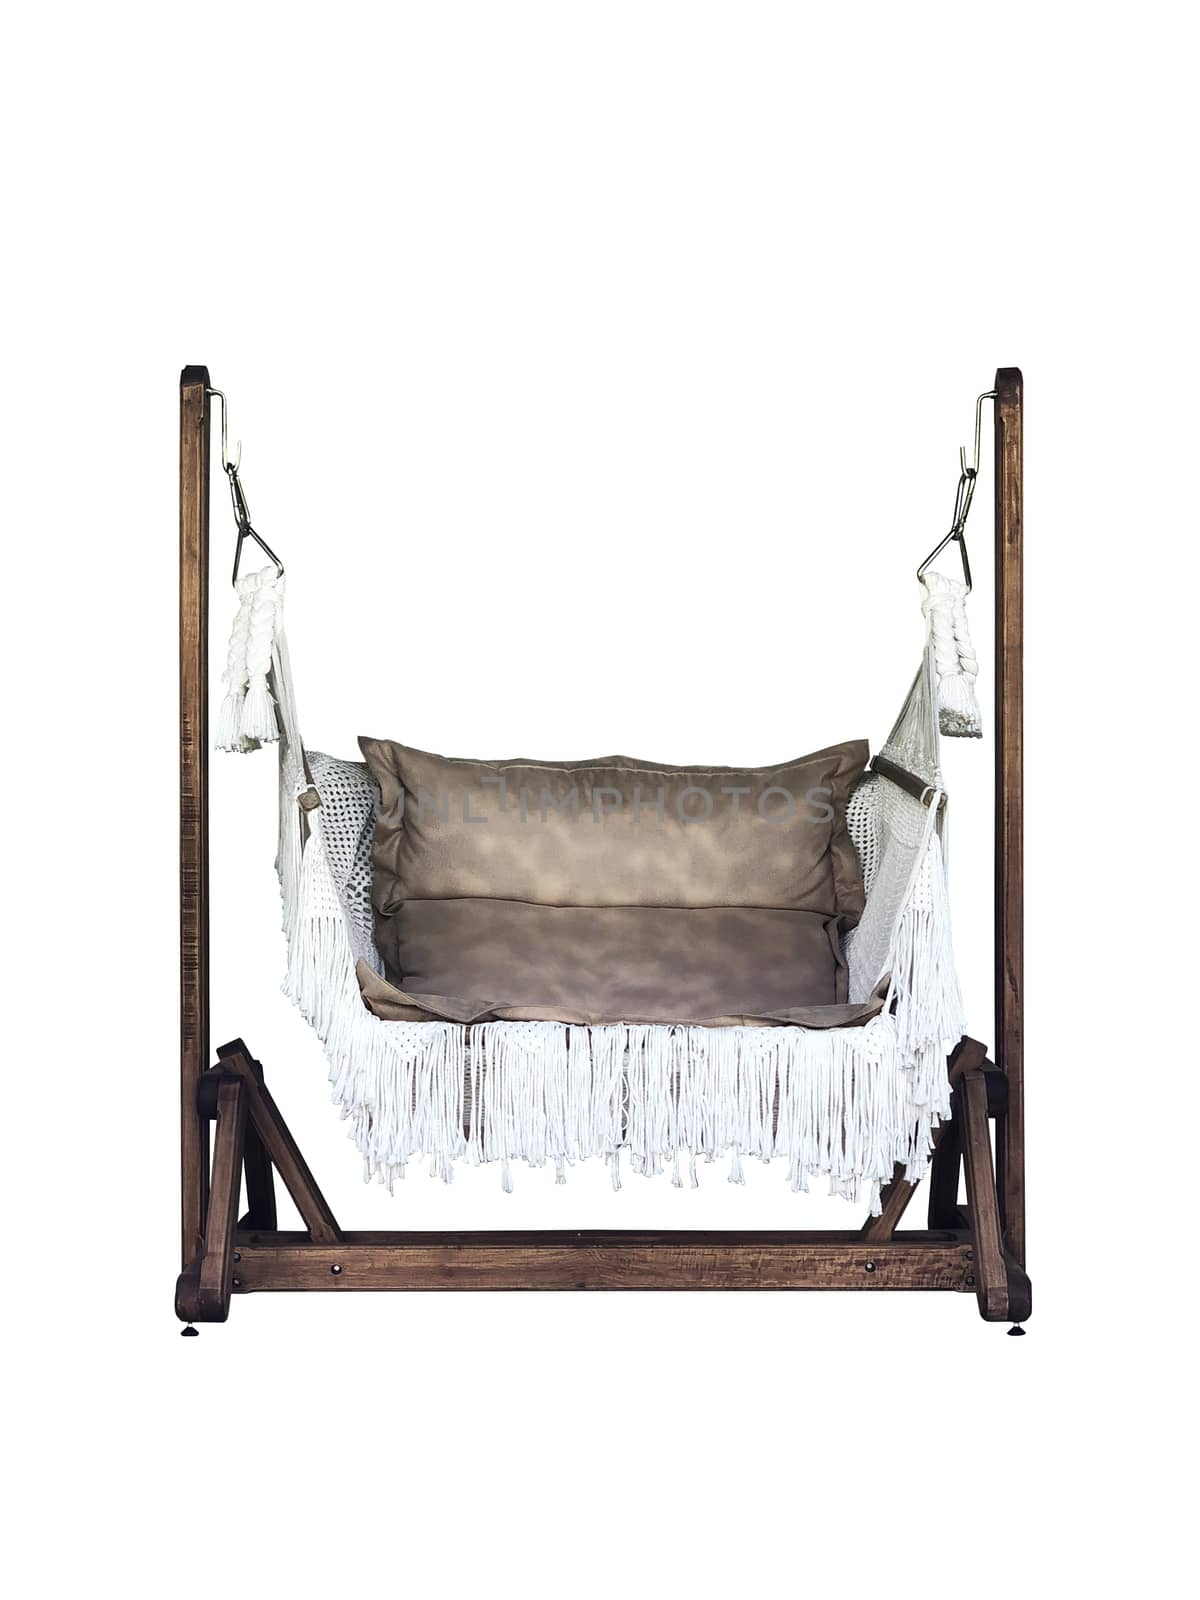 Classic outdoor chair leather swing isolalated on white blackground